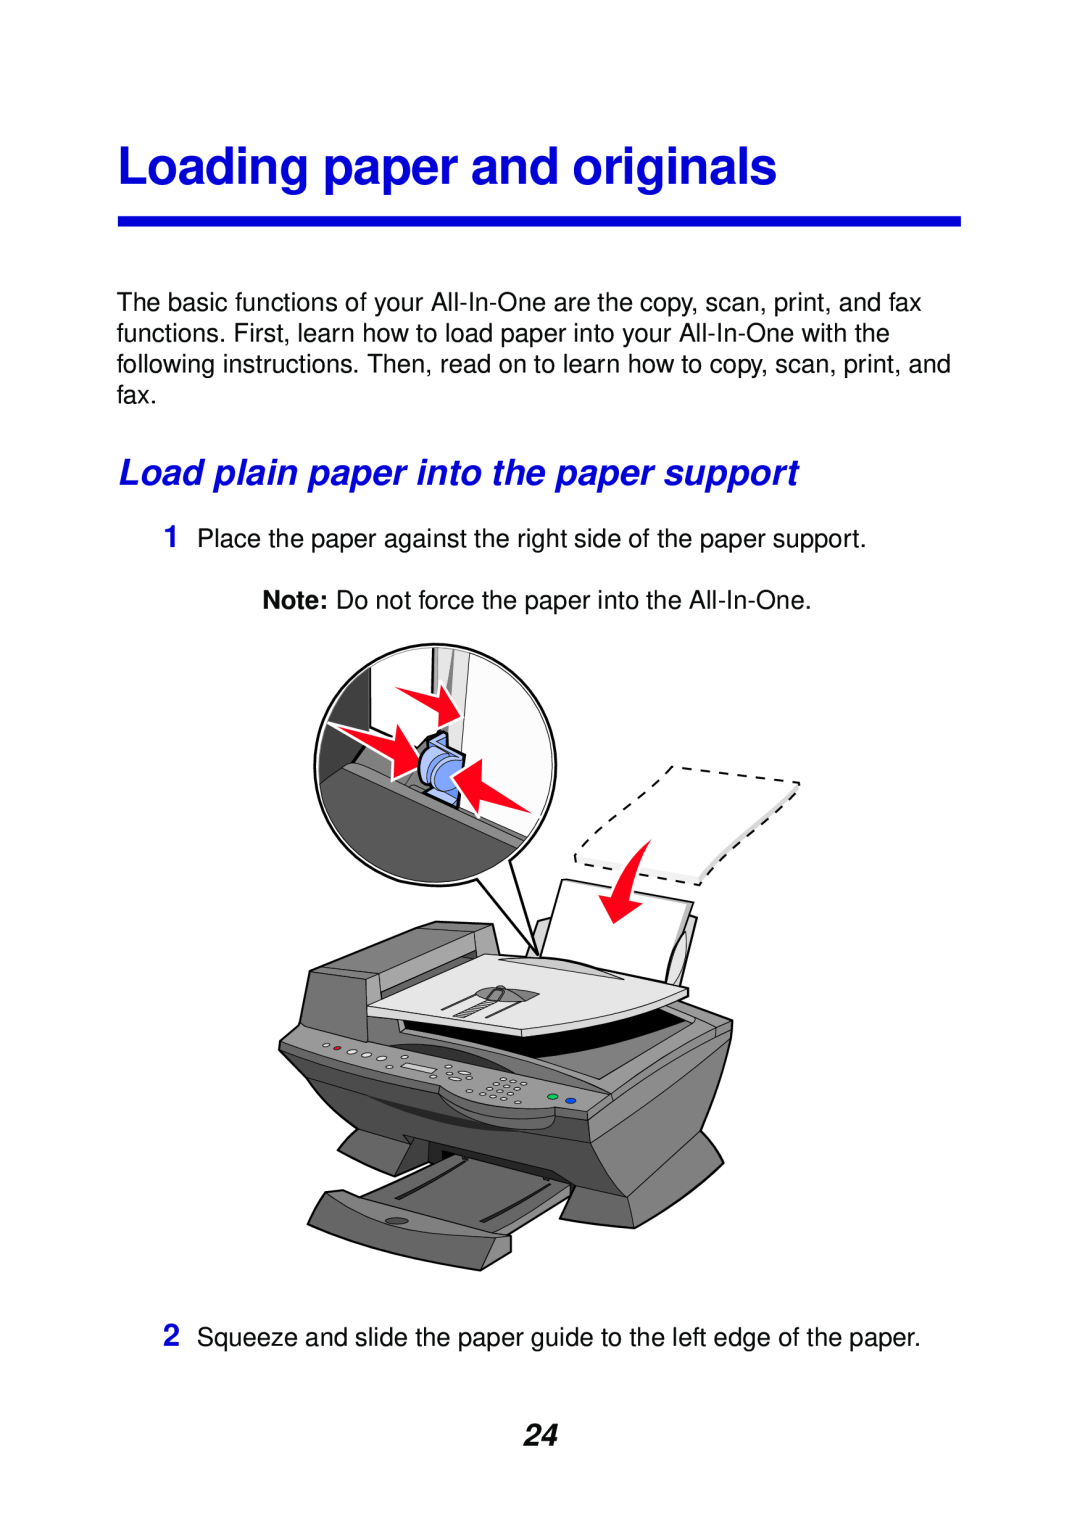 Lexmark X6100 manual Loading paper and originals, Load plain paper into the paper support 